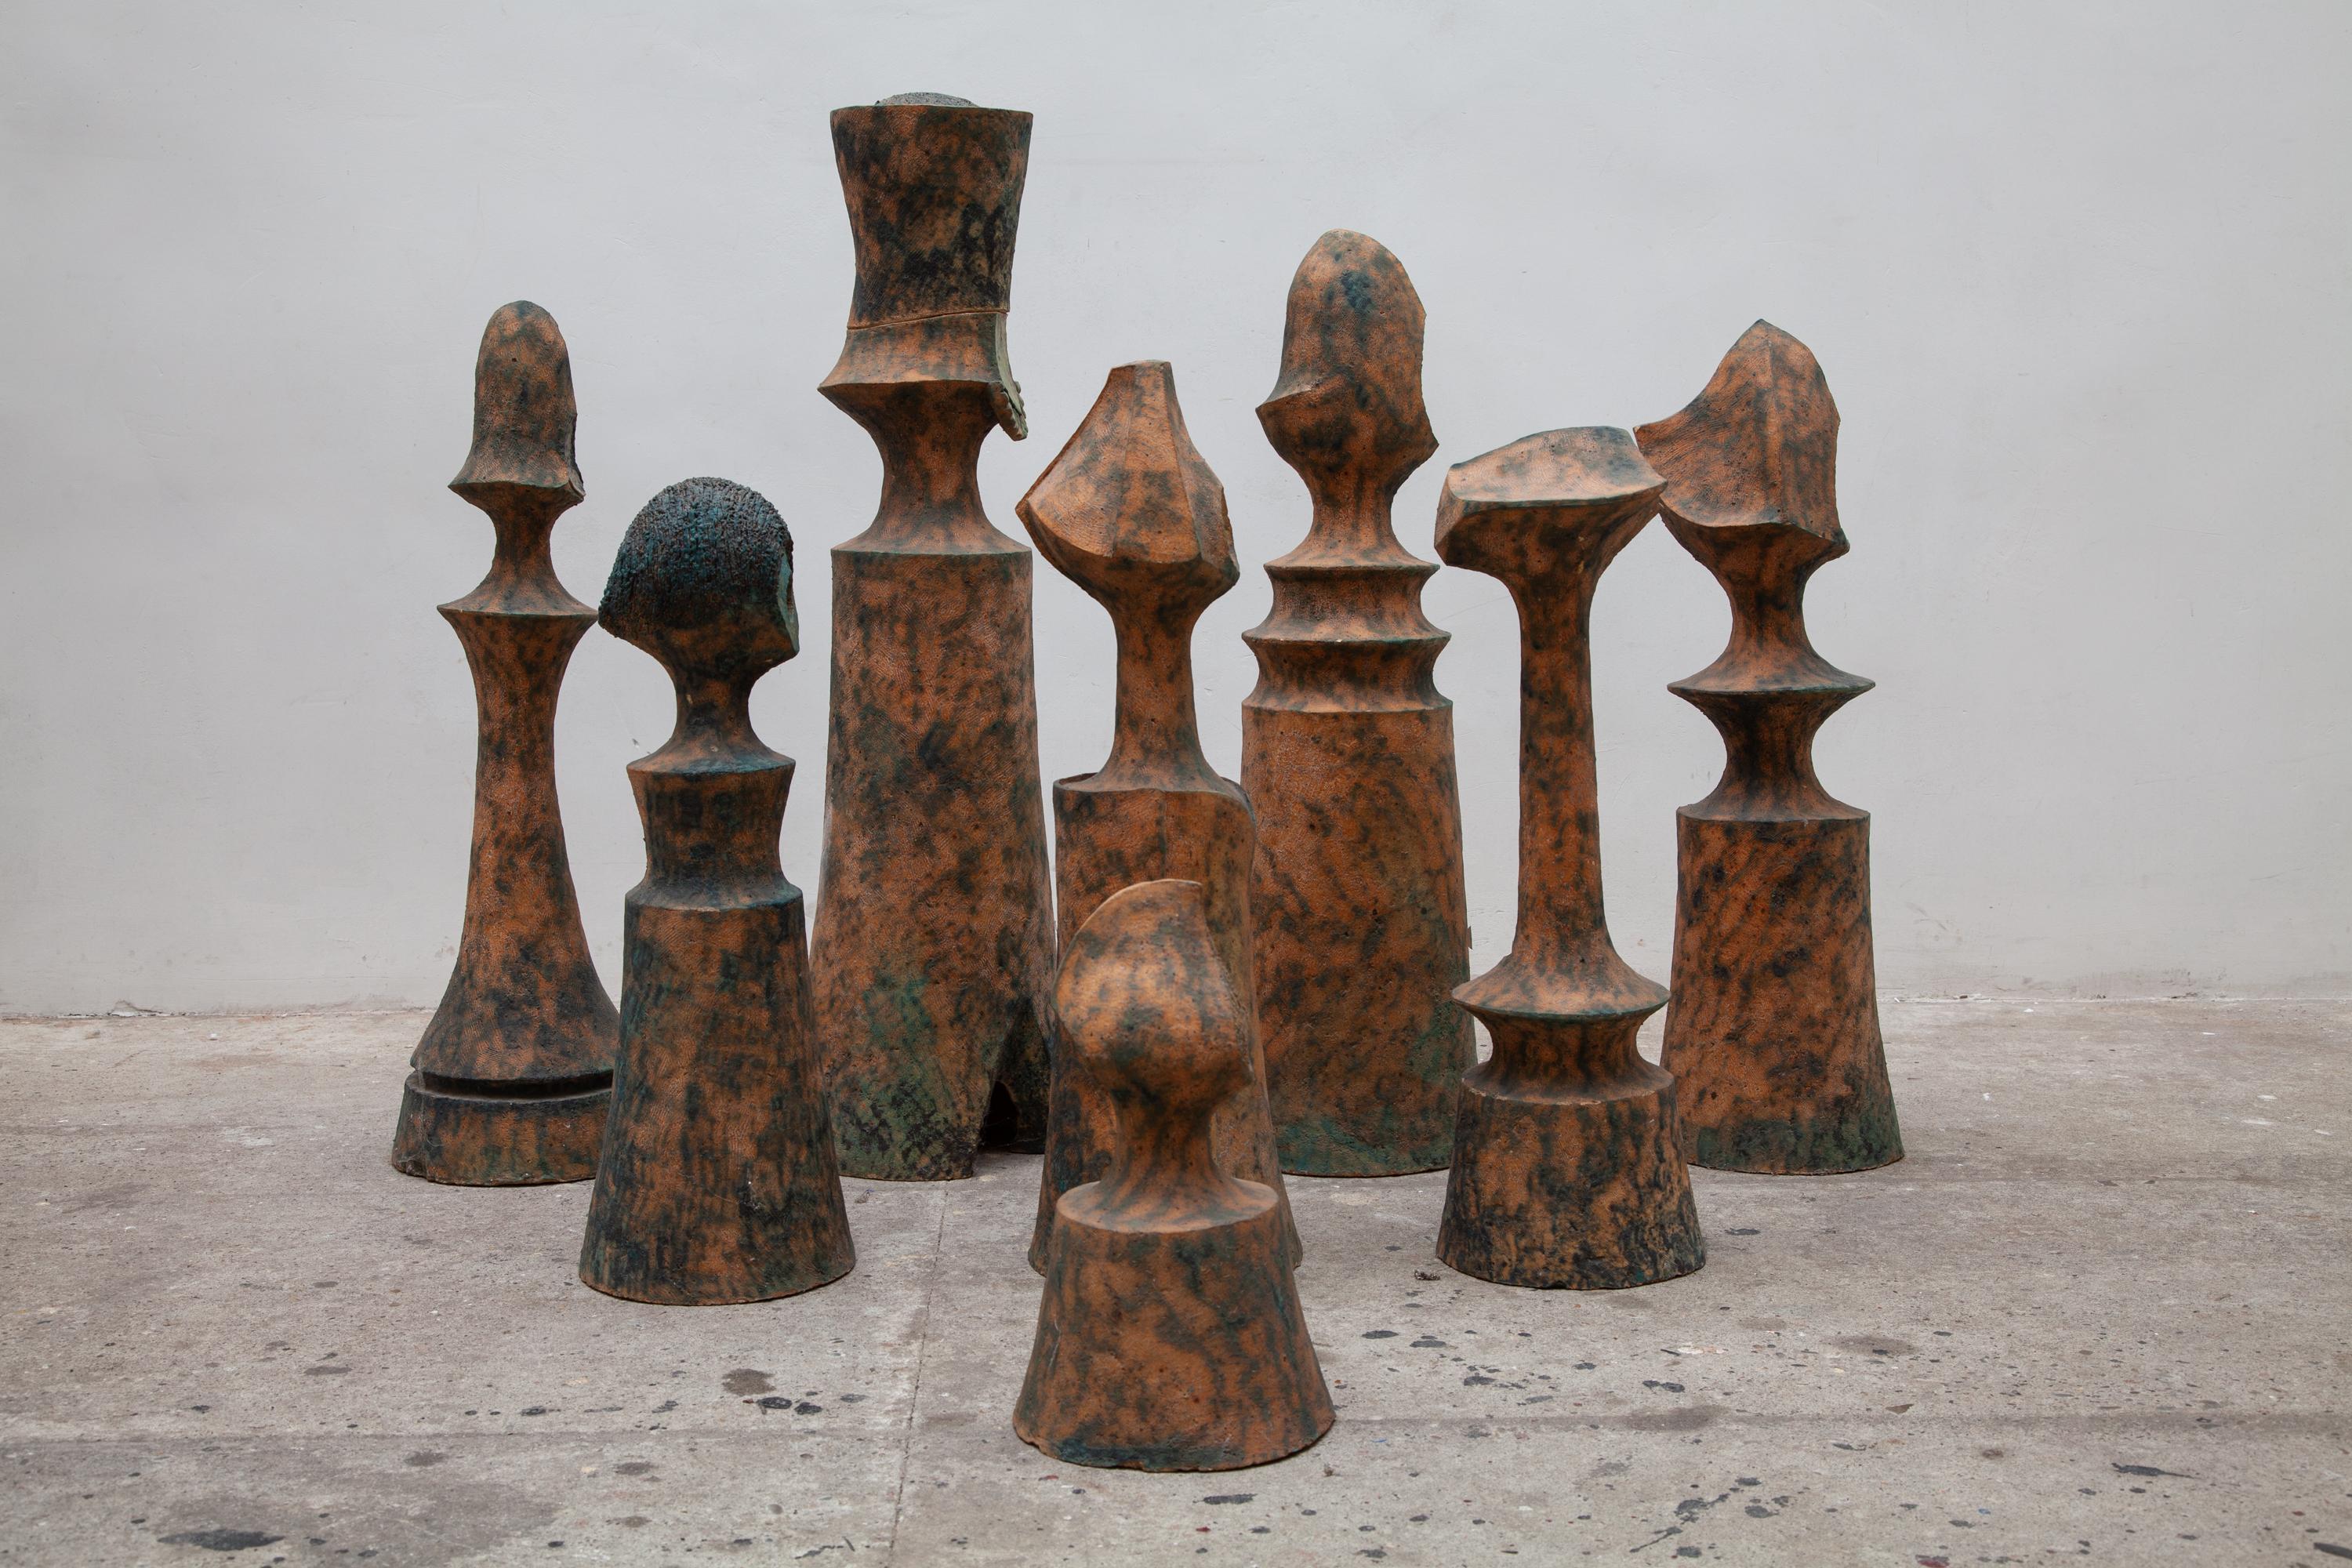 Large set of modern midcentury eight natural clay ceramic chess pieces, decorative figures of the King, the Queen a Rook, the Knight, a Bishop and a Pawn. Every piece is an unique hand-modeled life-size ceramic sculpture designed and executed in an